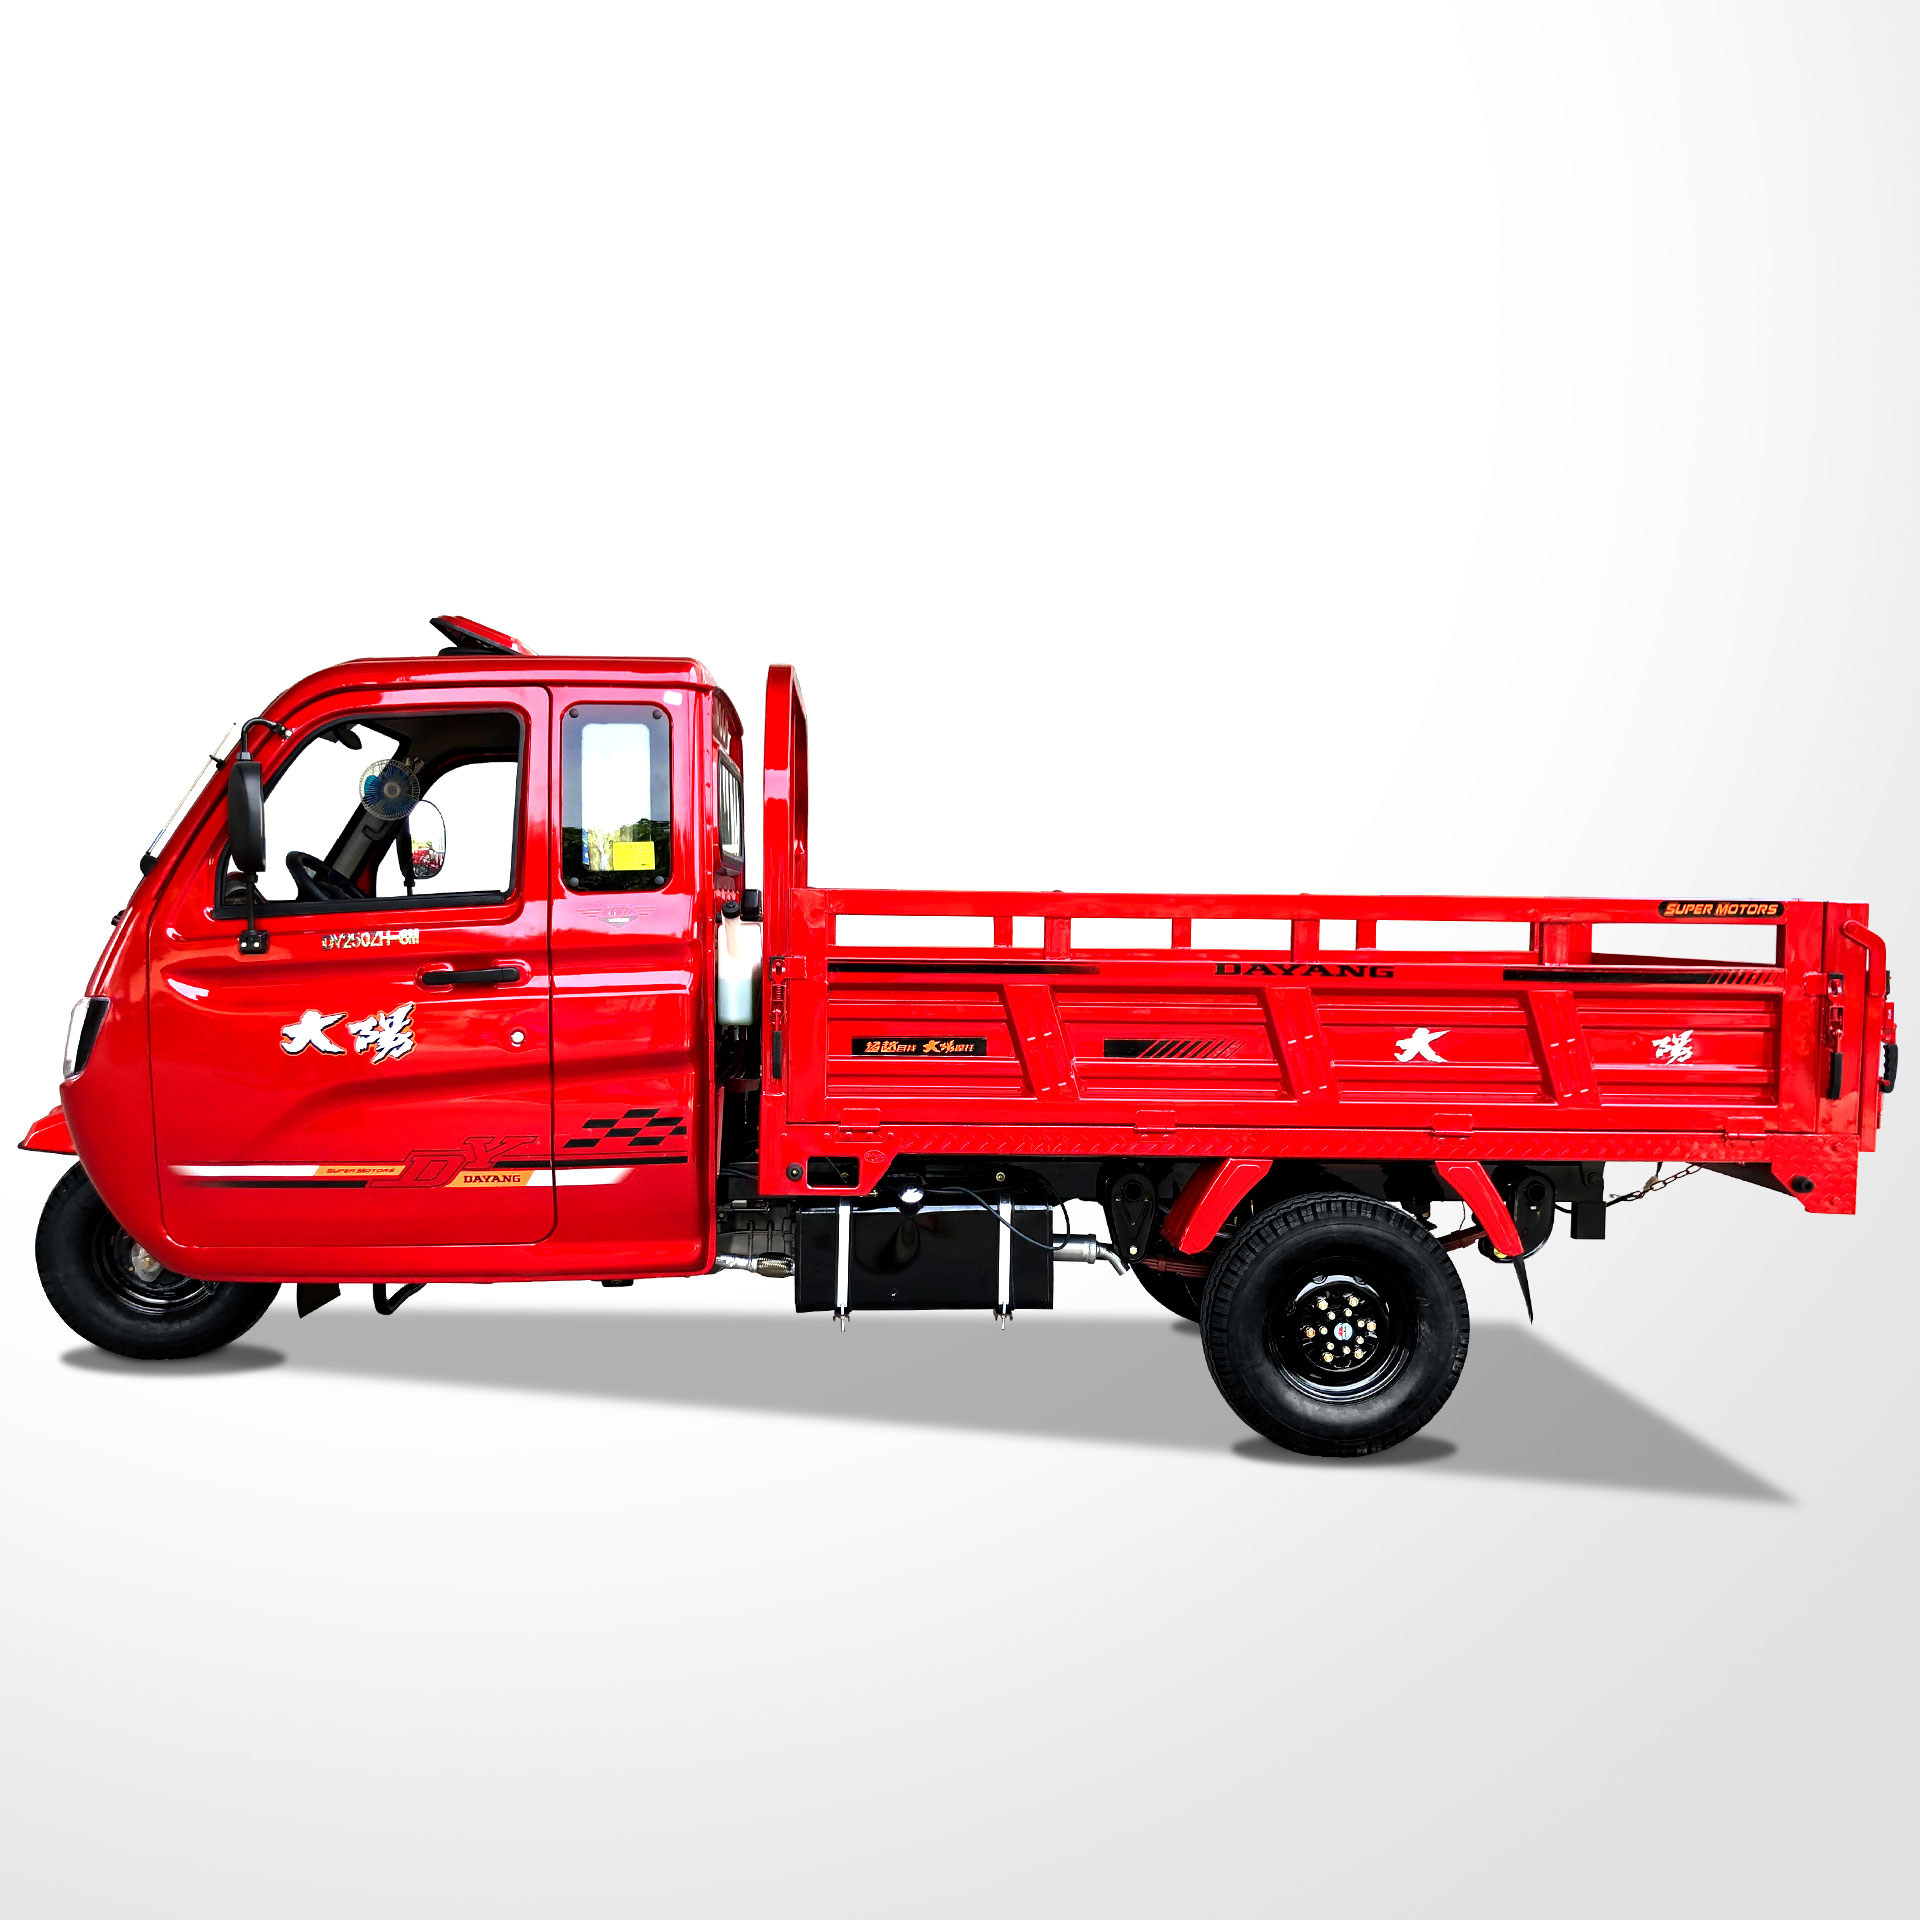 DAYANG 800cc water engine Passenger and cargo adult motorized tricycle cab enclosed Closed cab driving cargo convenient